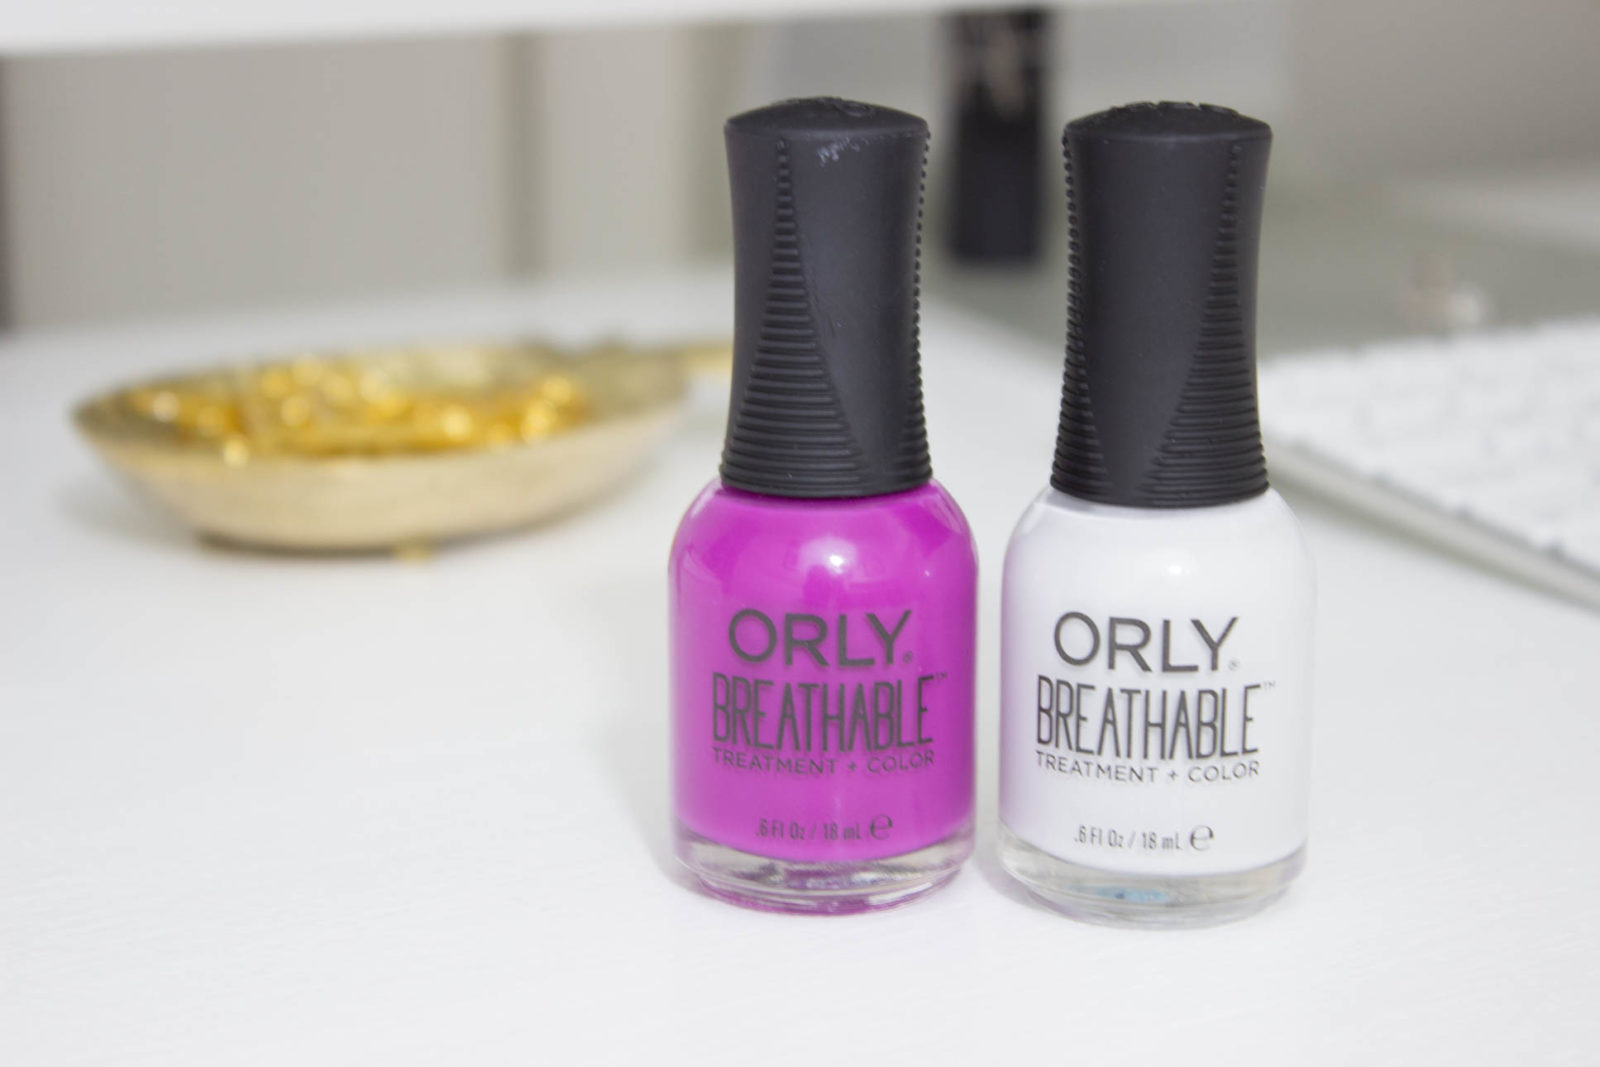 9. Orly Breathable Treatment + Color Nail Polish in "Haze" - wide 2